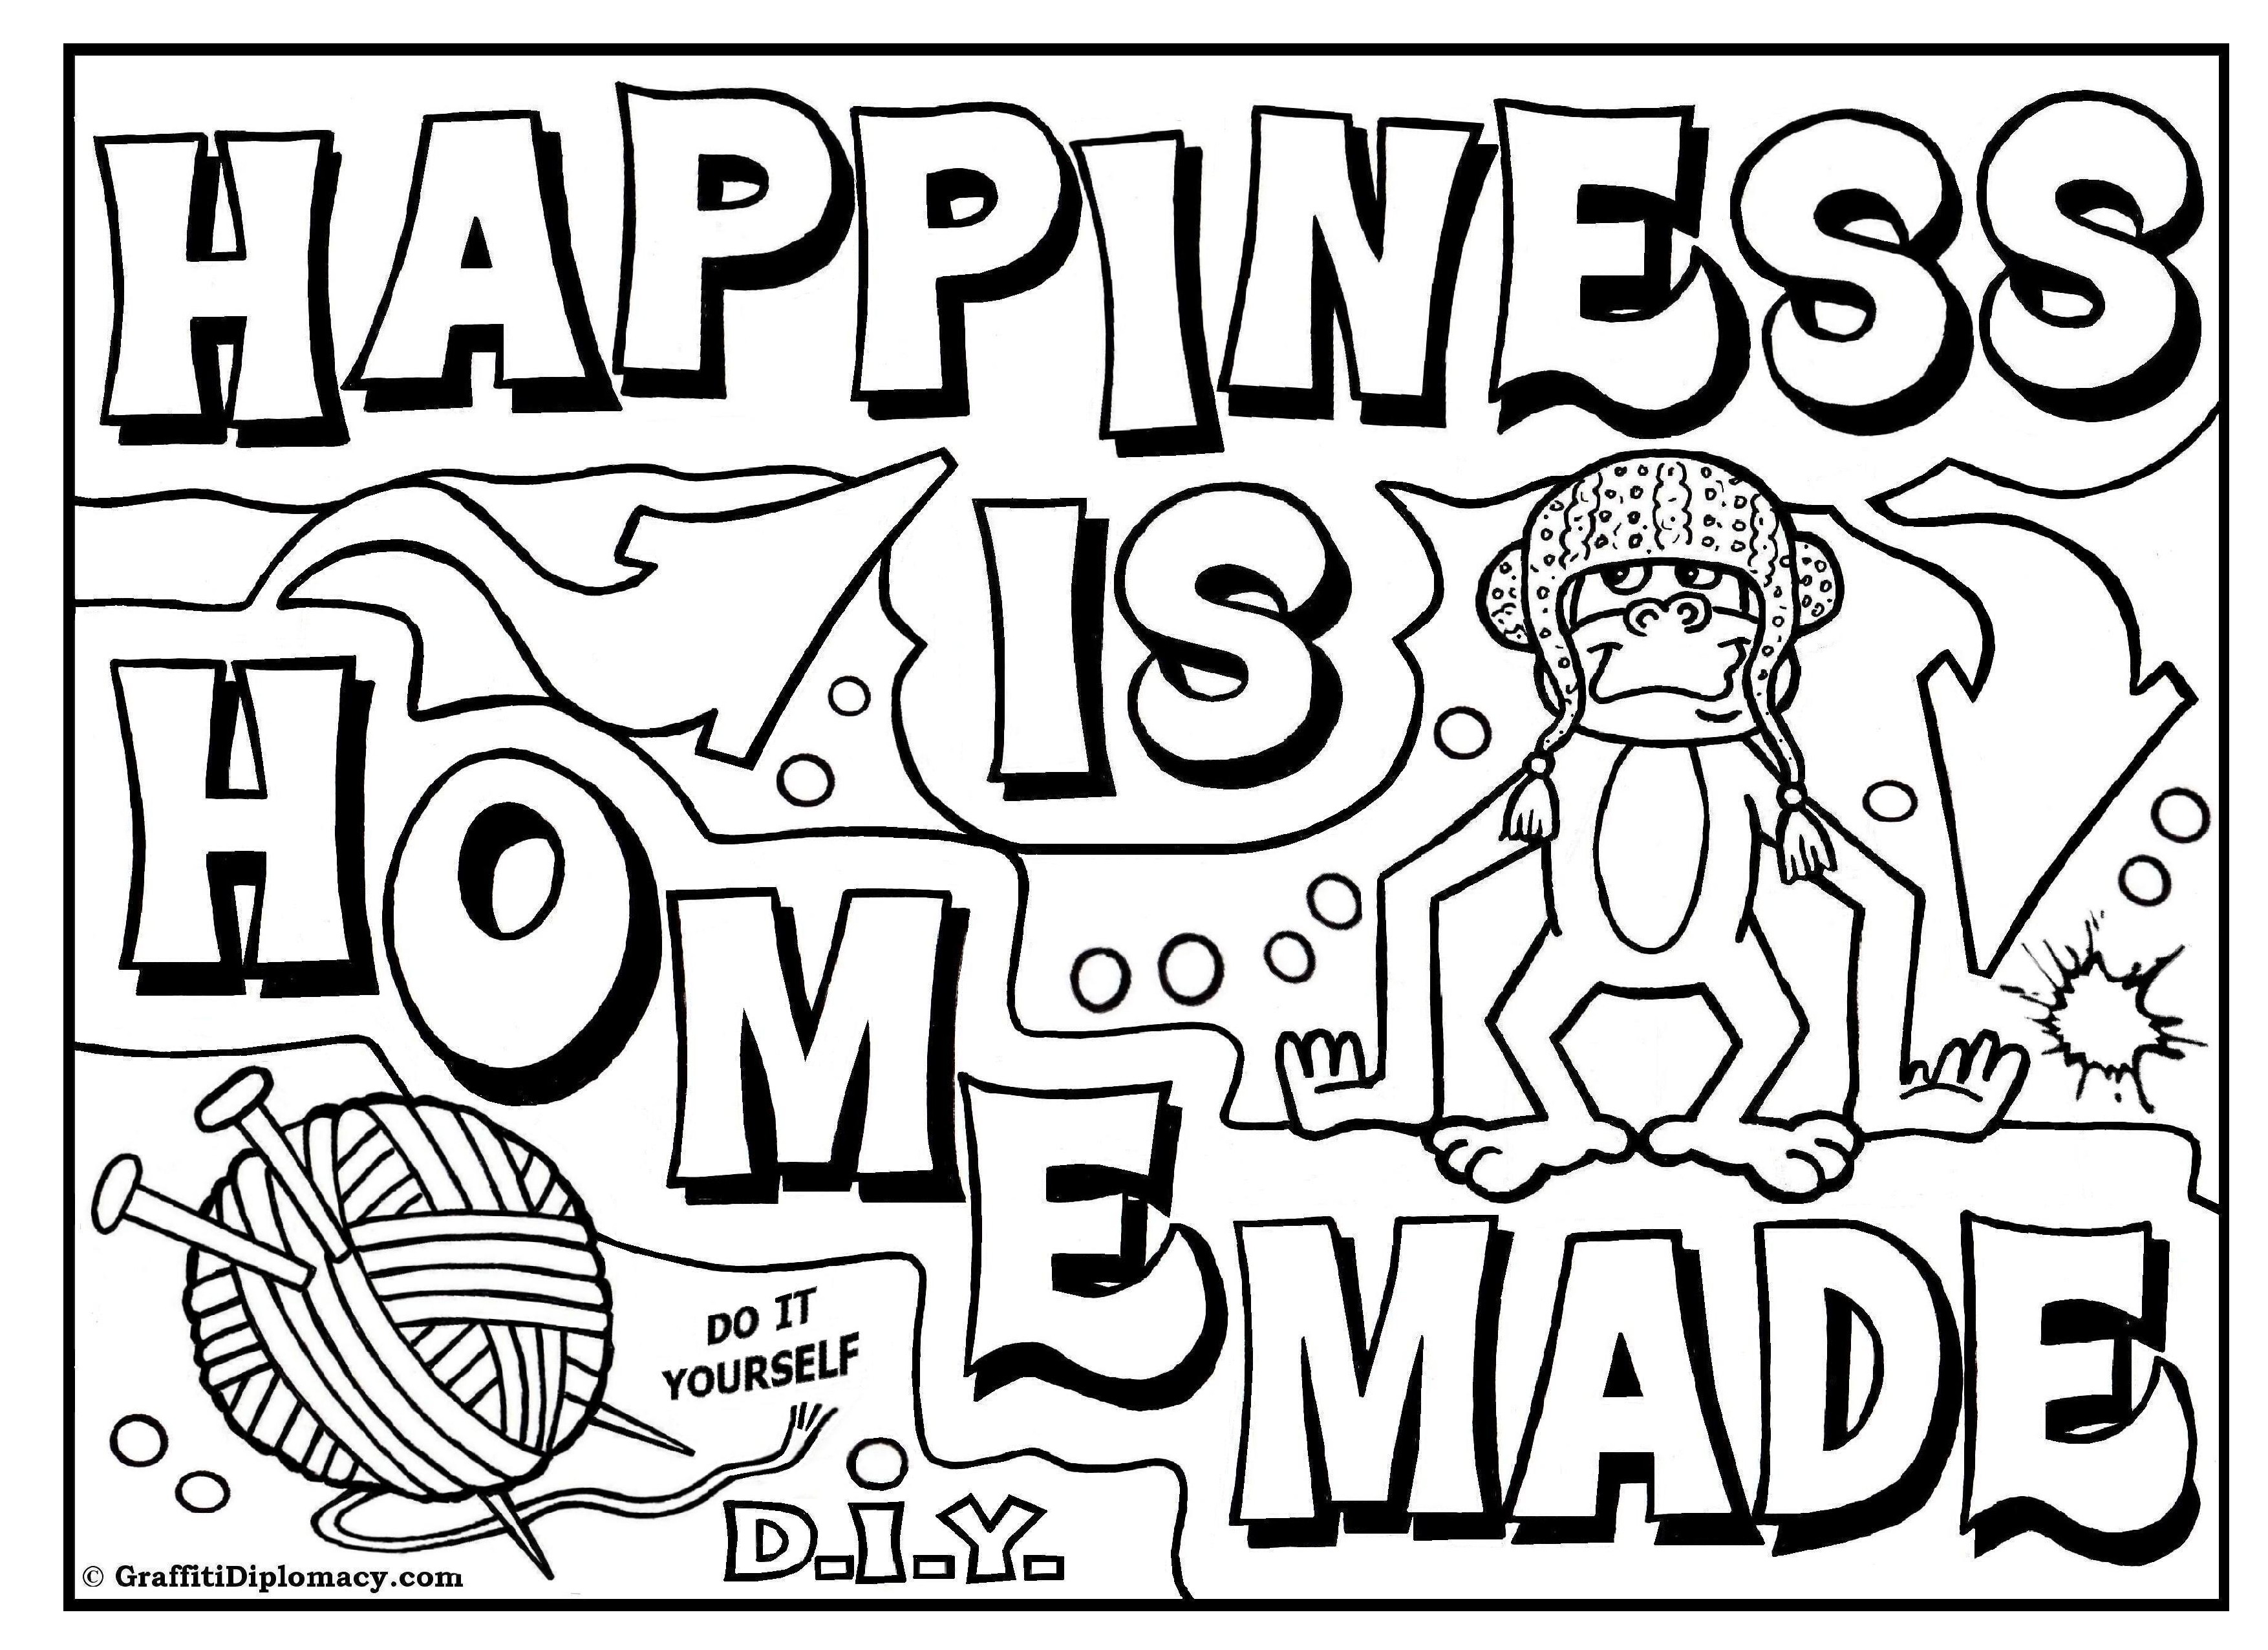 Make Your Own Coloring Pages With Words At Getcolorings.com | Free